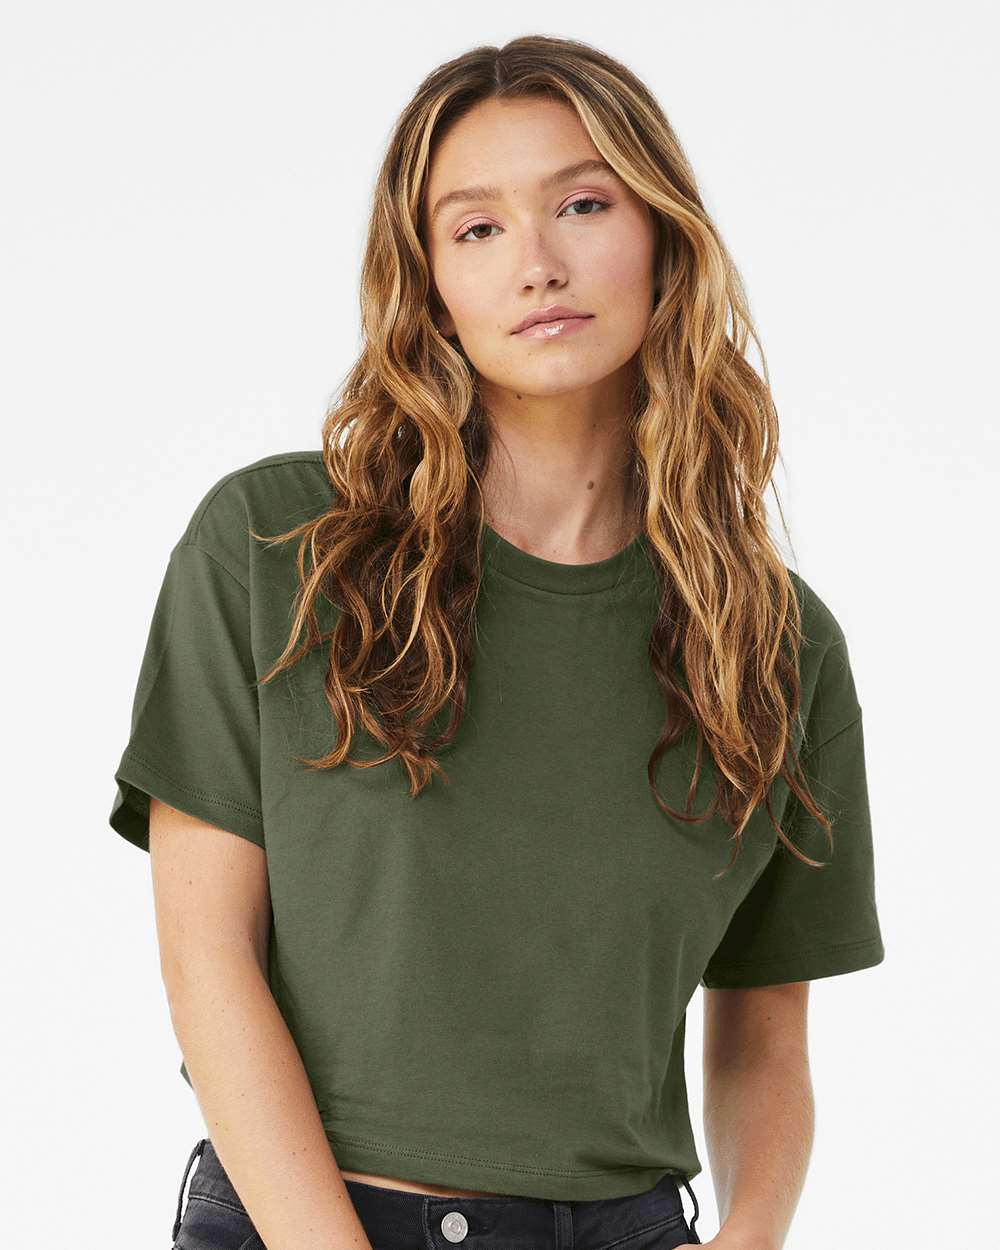 click to view Military Green